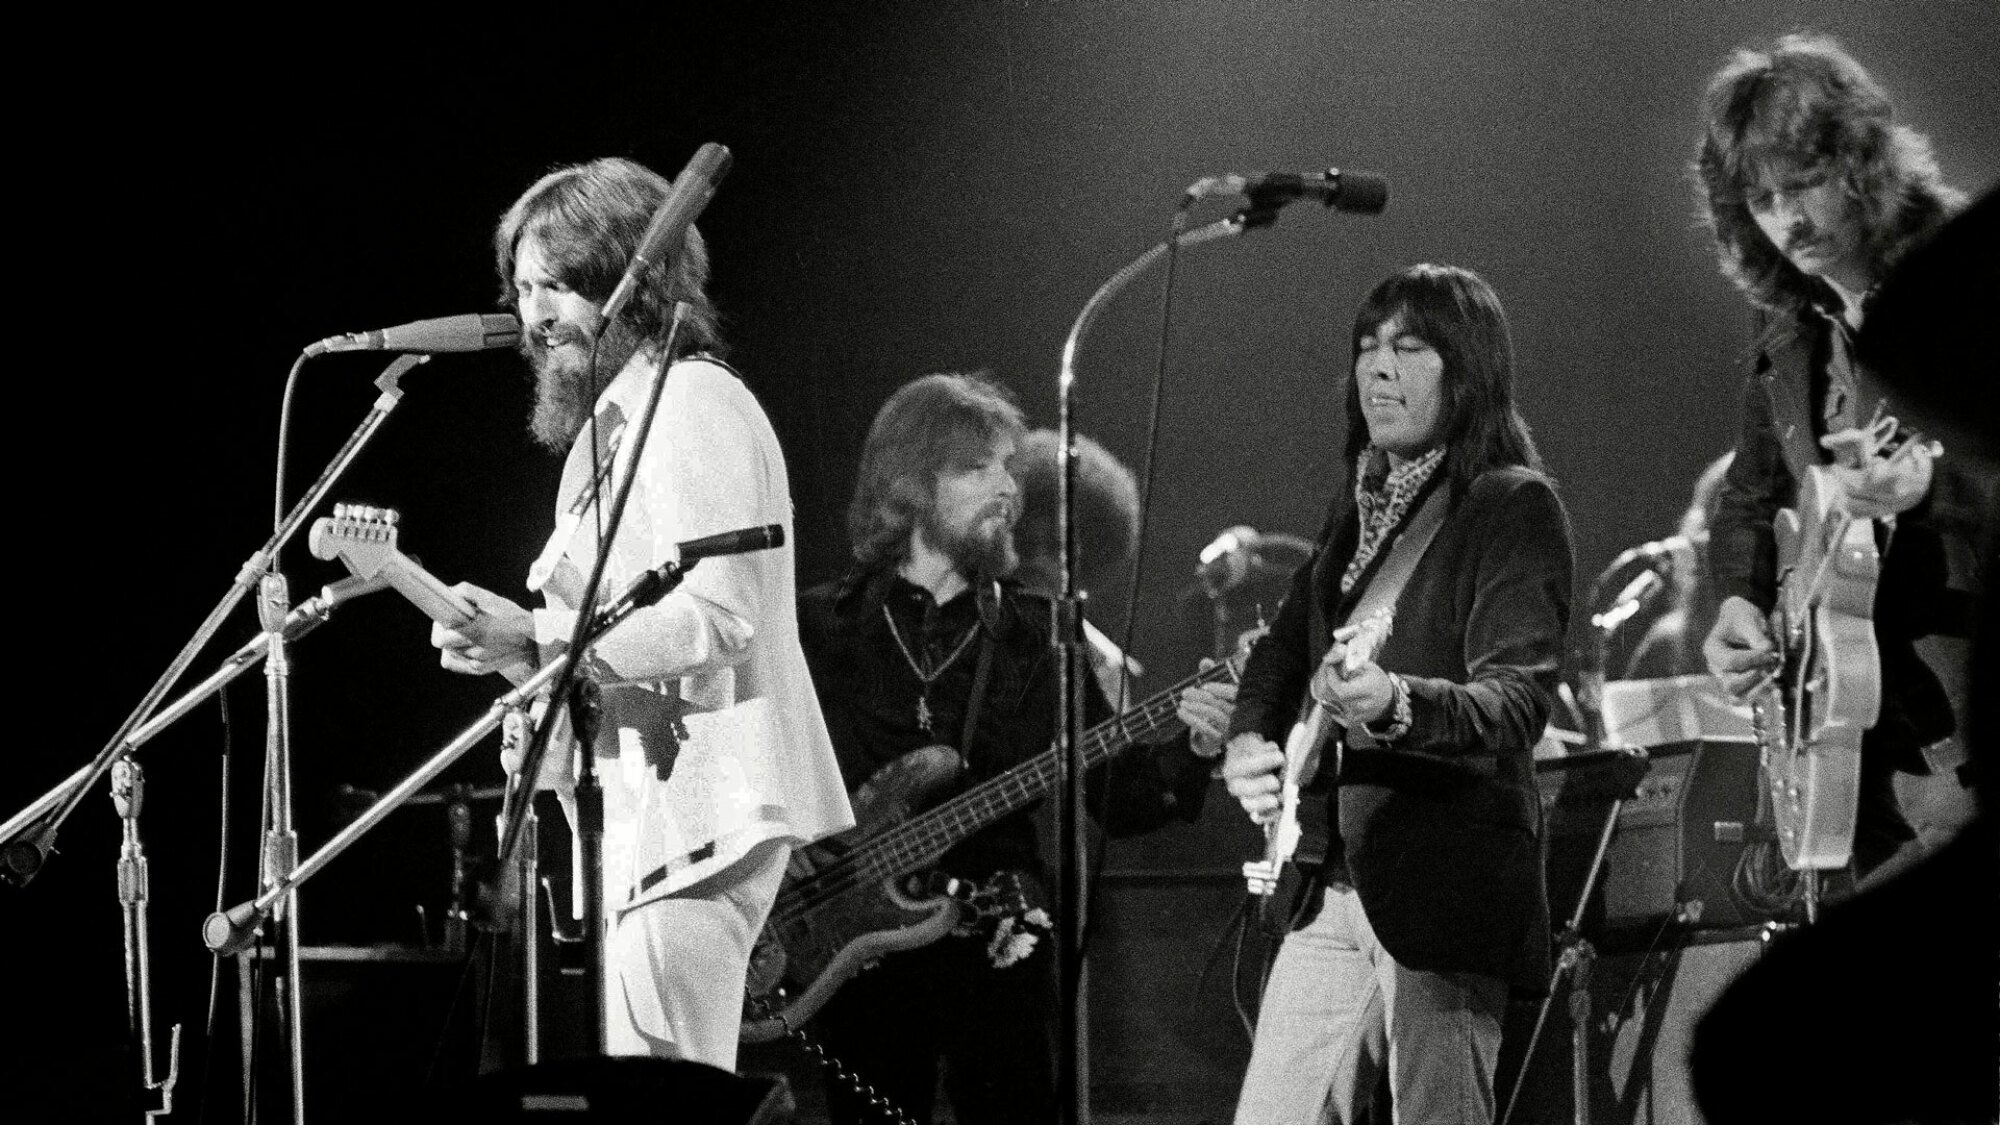 A live concert still from "Rumble: The Indians Who Rocked the World" featuring George Harrison, Klaus Voorman, Jesse Ed Davis, and Eric Clapton.